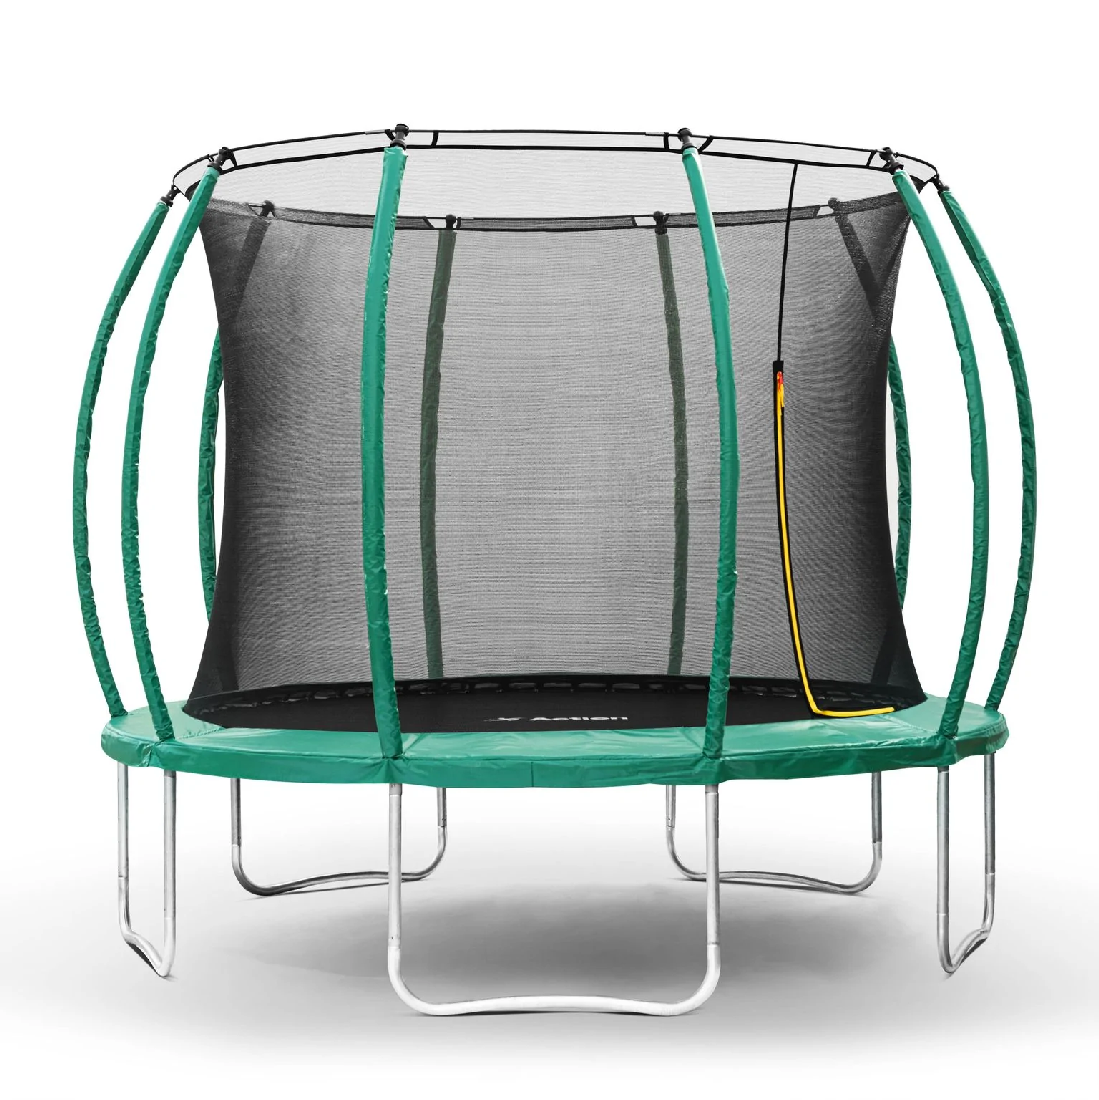 ACTION ULTIMATE TRAMPOLINE - 10FT